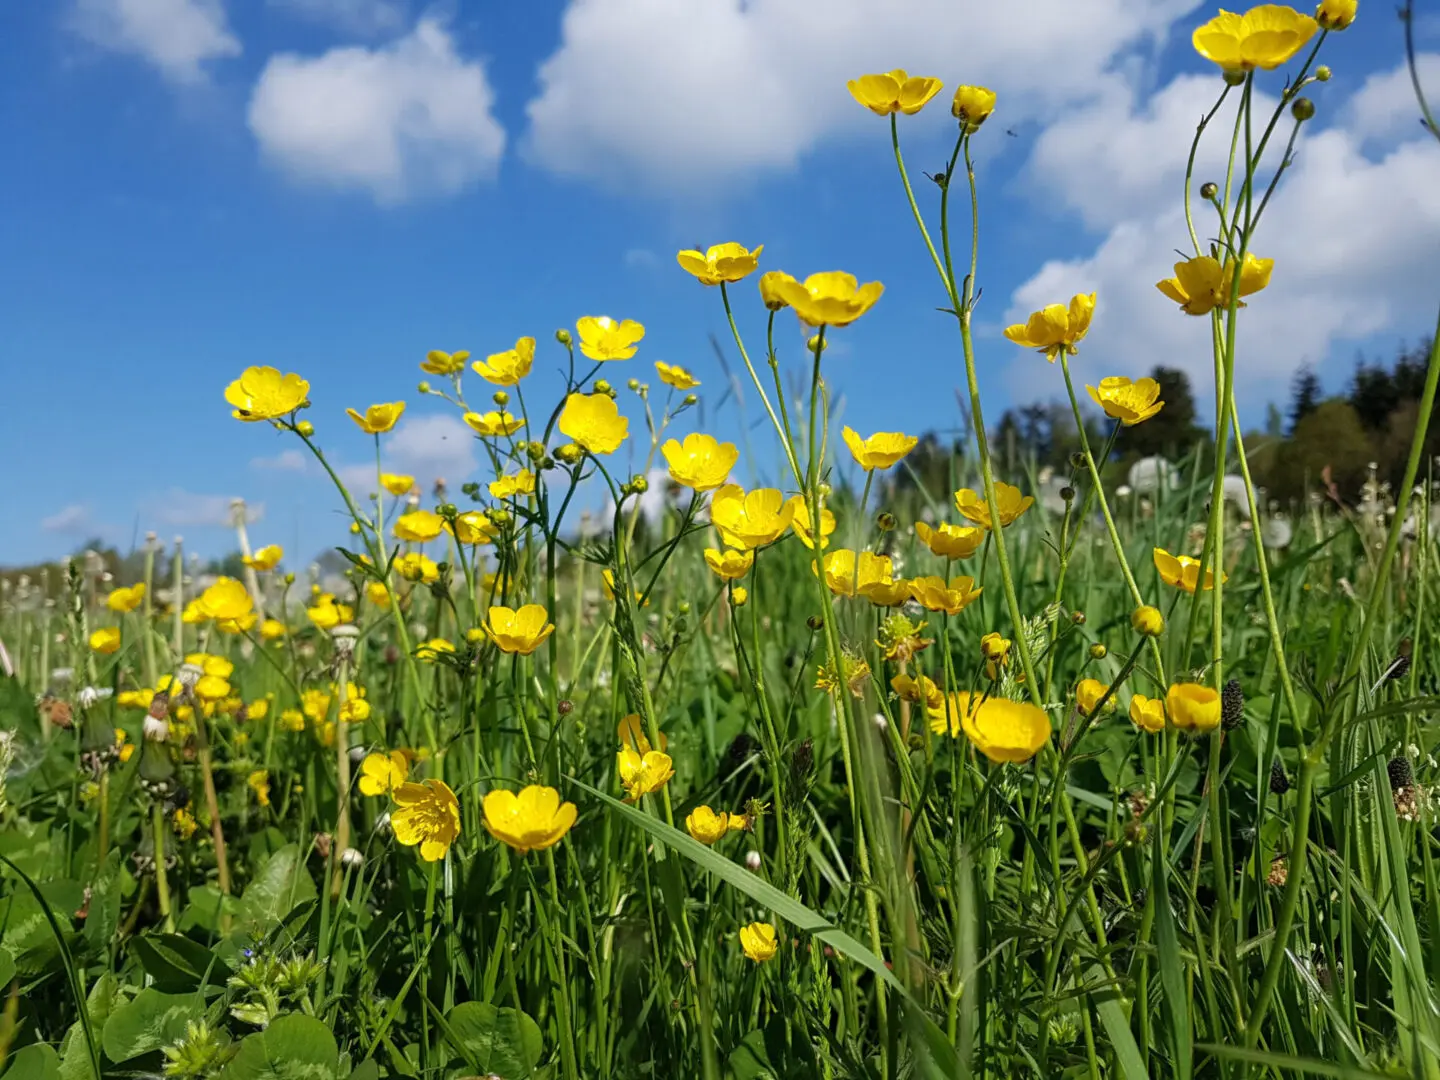 A field of yellow flowers under the blue sky.